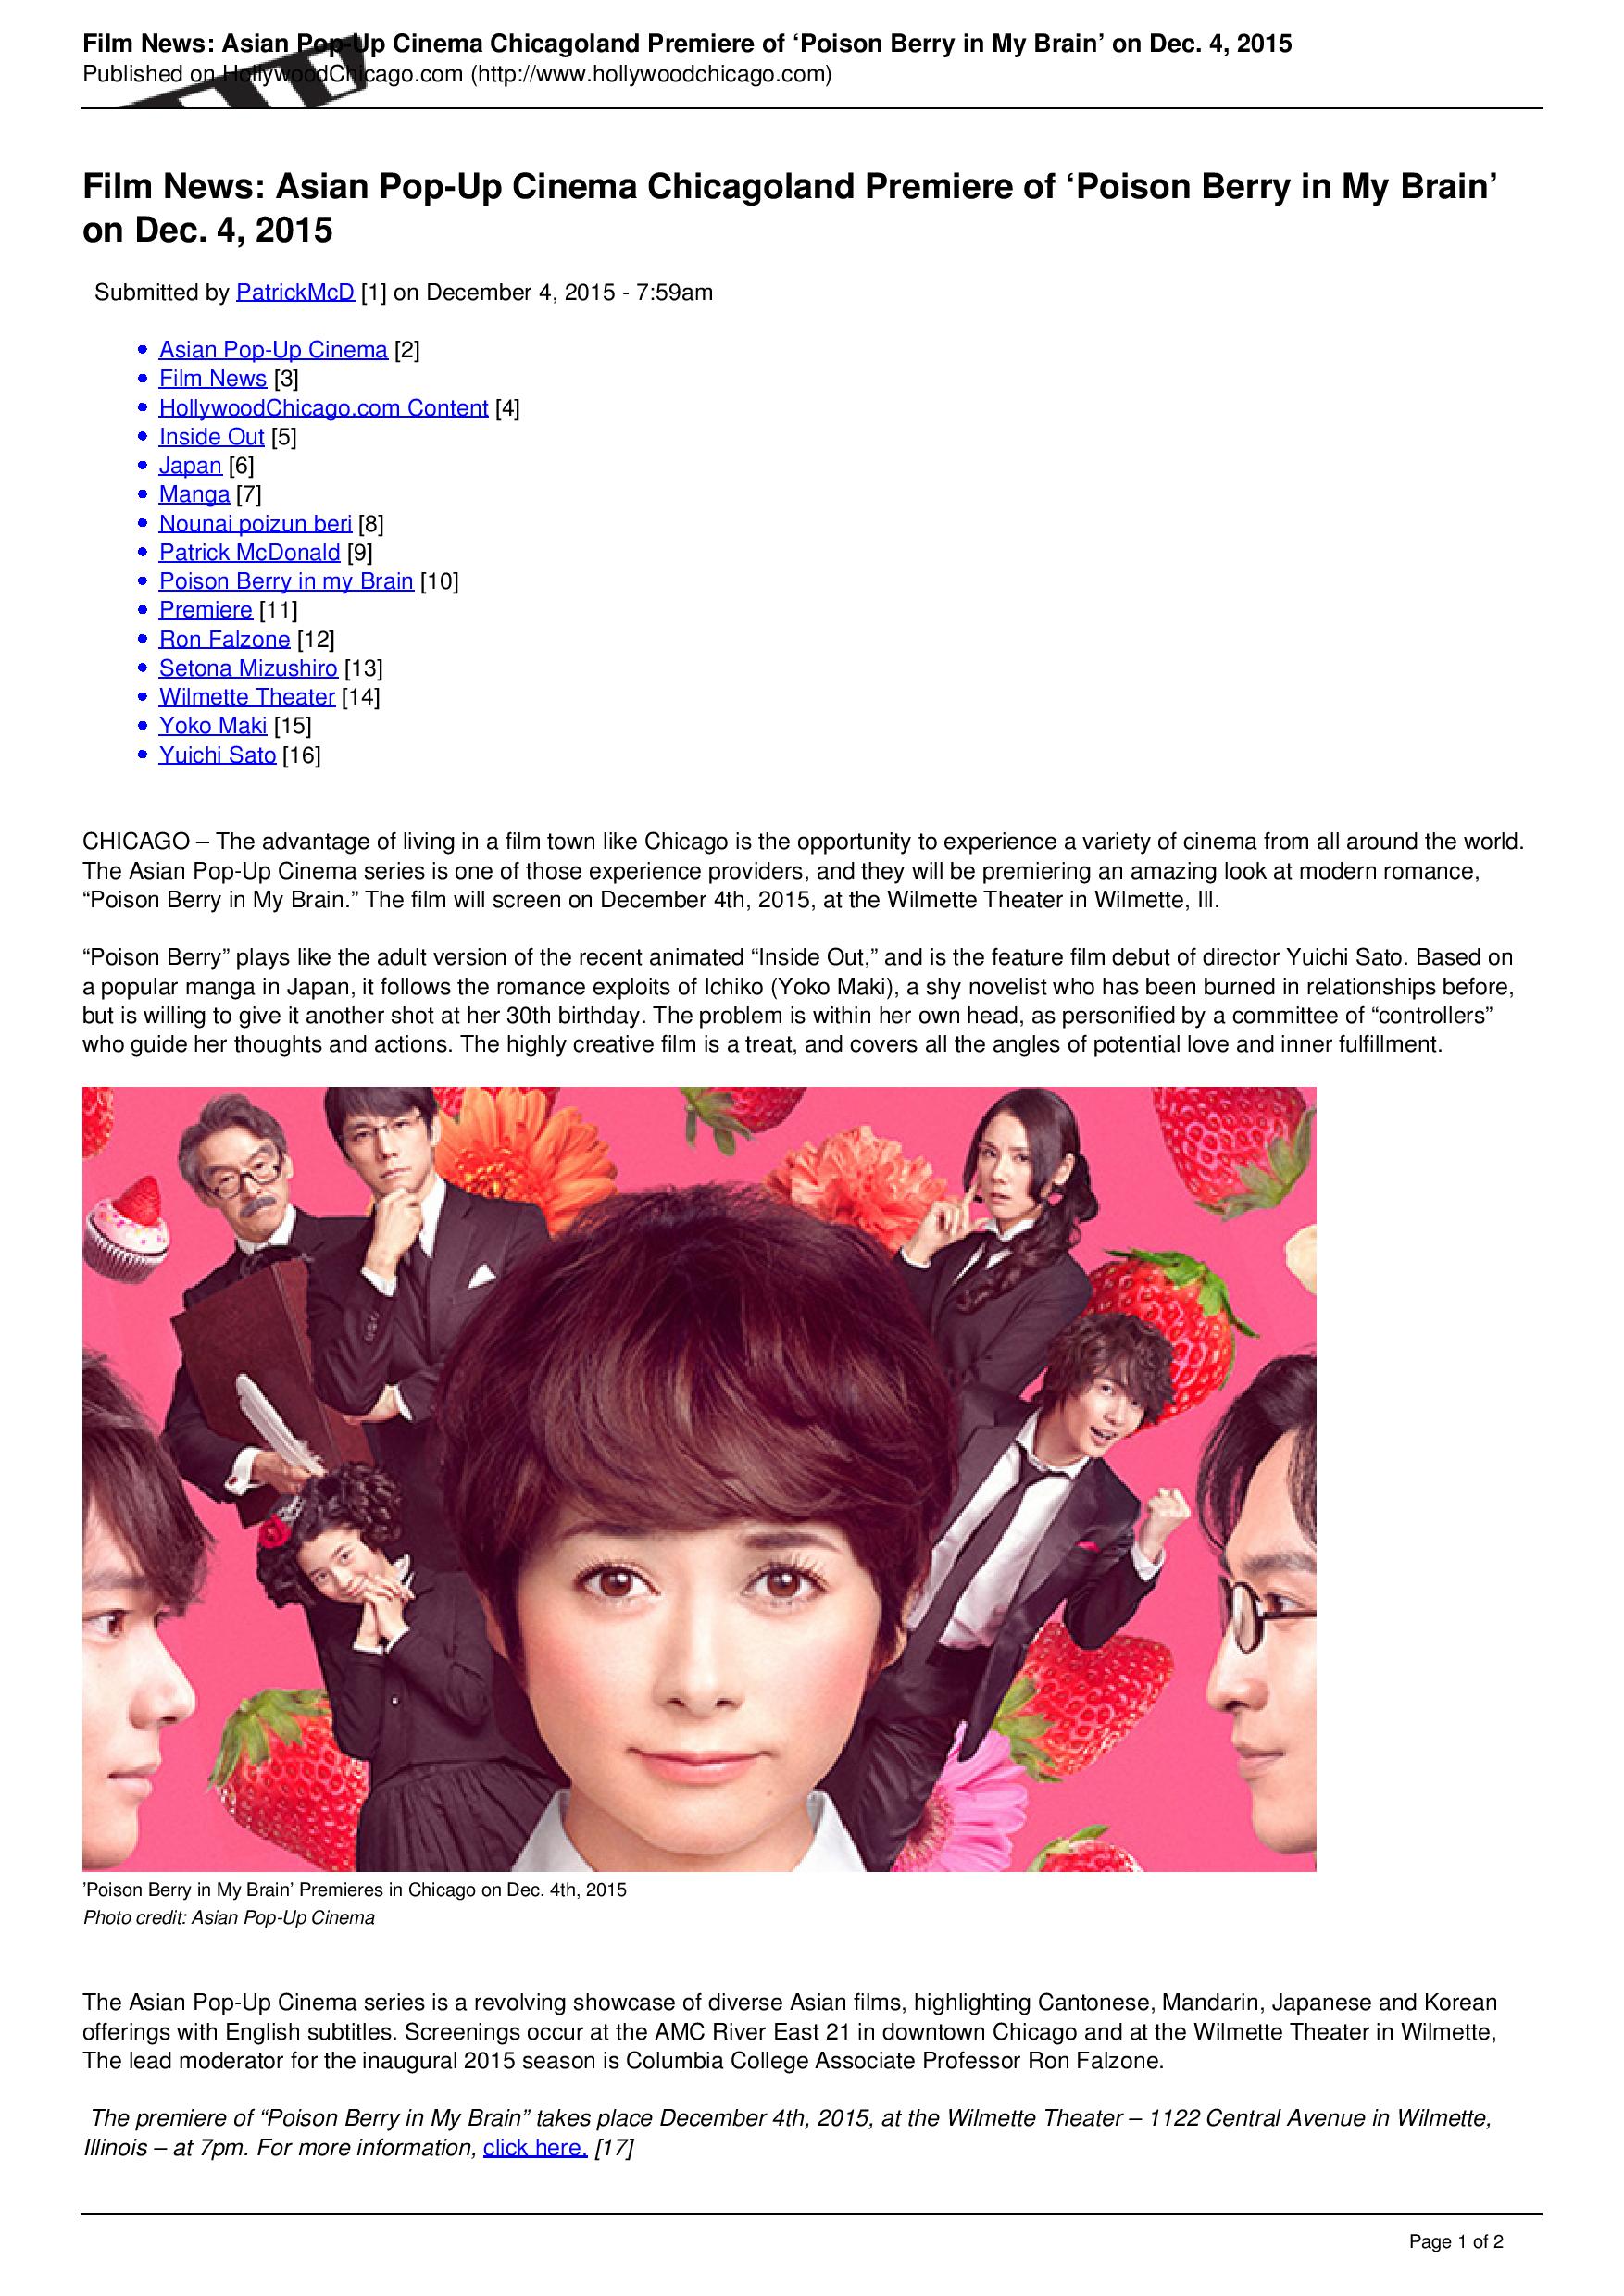 HollywoodChicago.com_-_Film_News_Asian_Pop-Up_Cinema_Chicagoland_Premiere_of_Poison_Berry_in_My_Brain_on_Dec._4_2015_-_2015-12-04-page-001.jpg